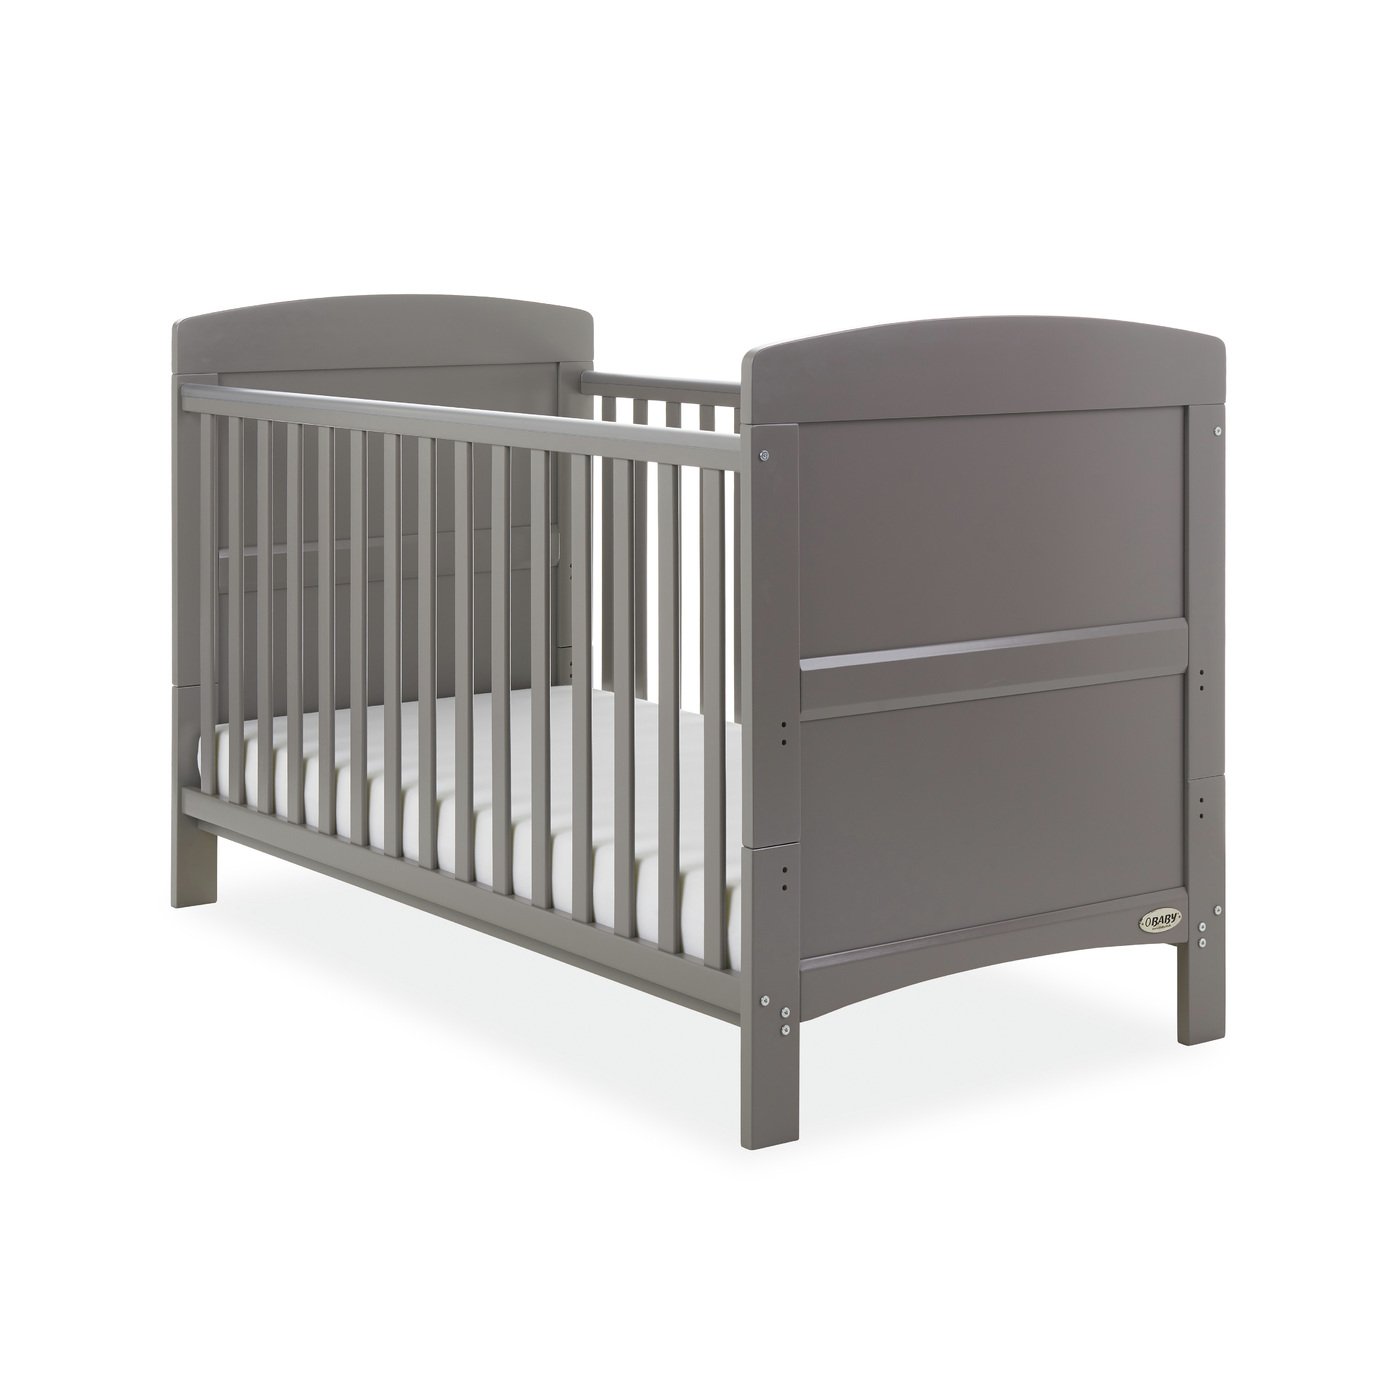 Obaby Grace Baby Cot Bed with Mattress Review